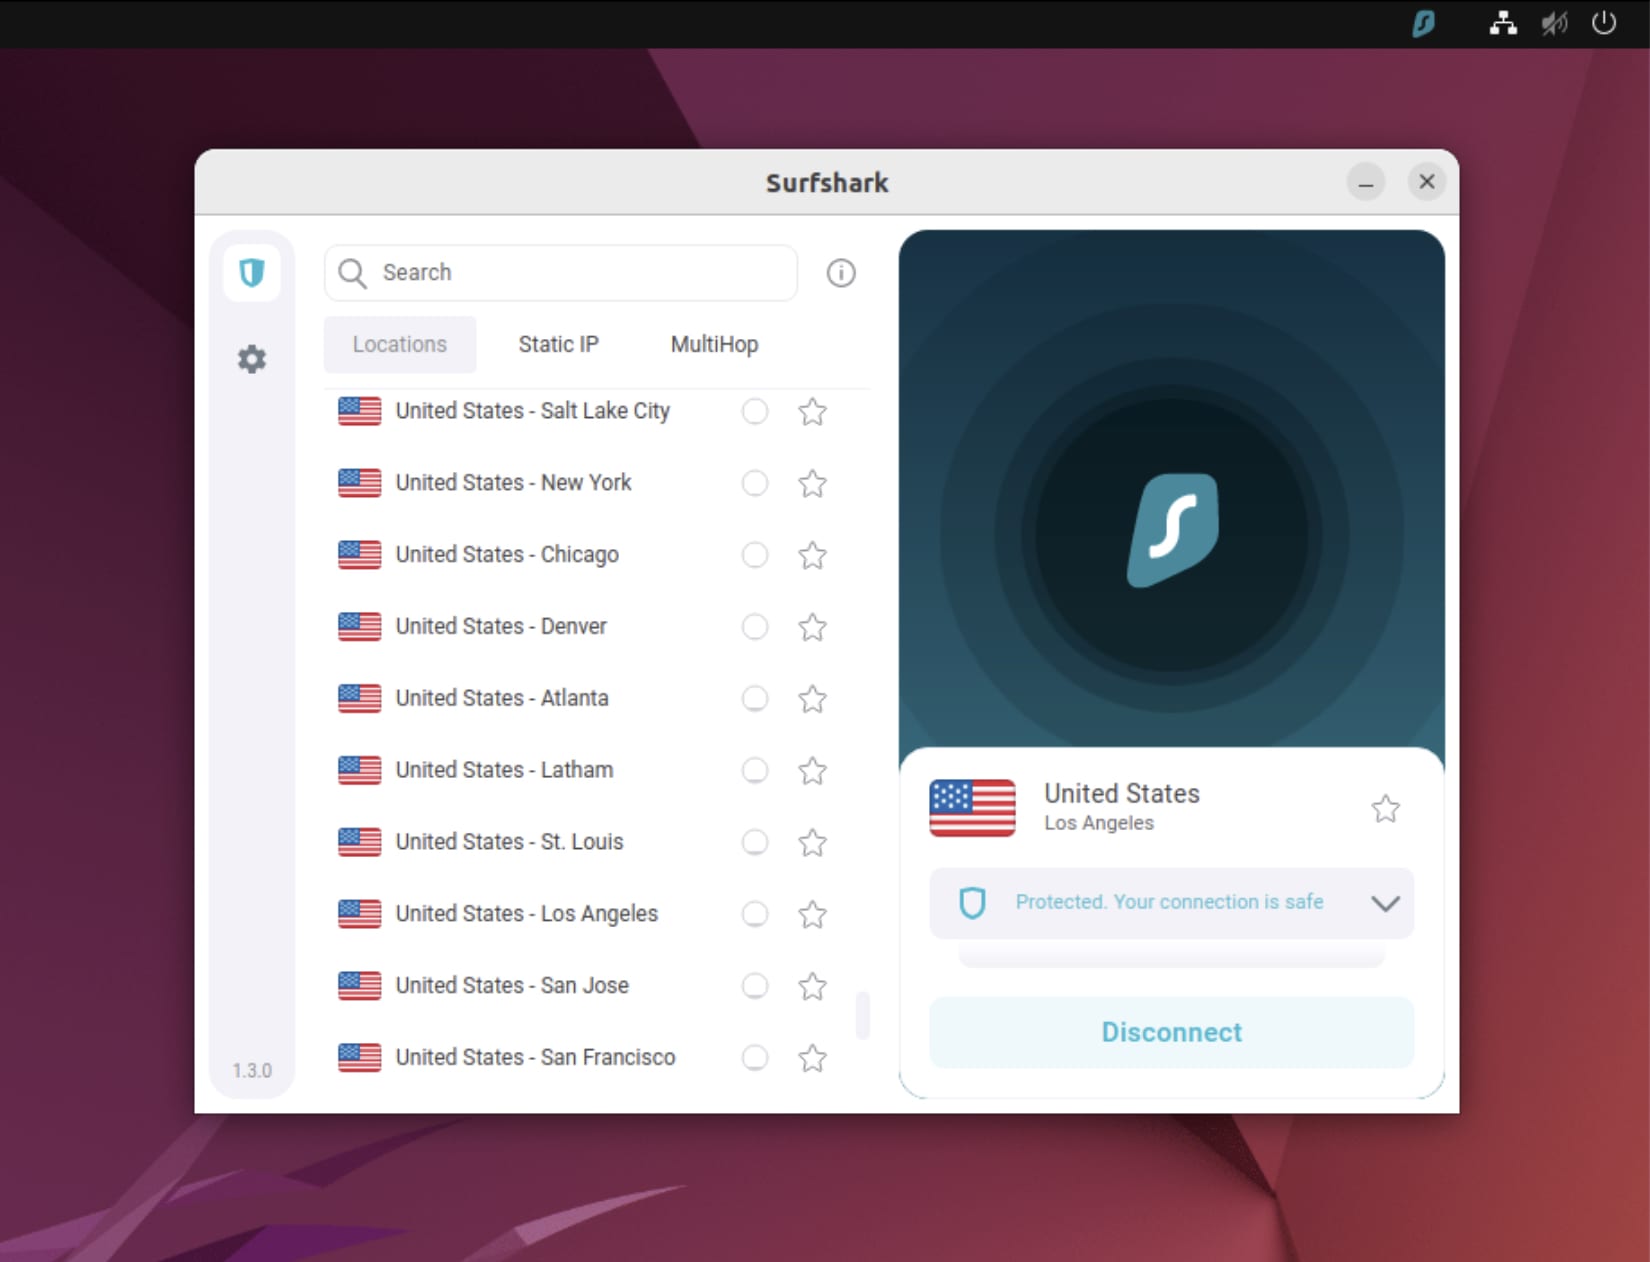 The home screen of the Surfshark app for Linux.